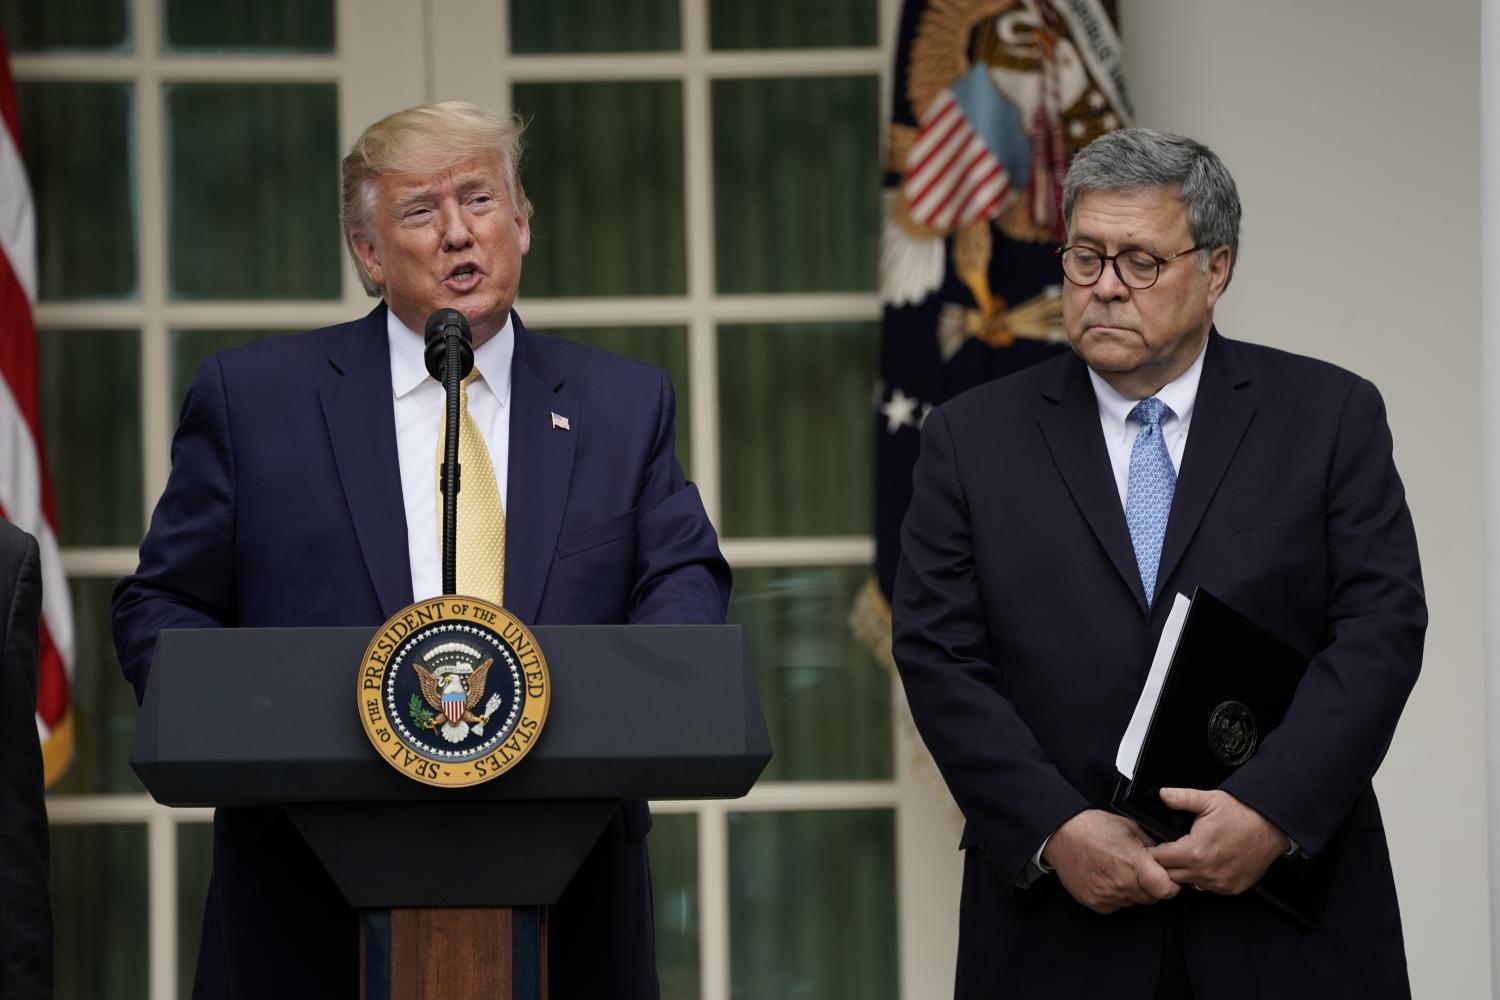 U.S. President Donald Trump stands with Attorney General Bill Barr as he announces his administration's effort to gain citizenship data during the 2020 census at an event in the Rose Garden of the White House in Washington, U.S., July 11, 2019. REUTERS/Kevin Lamarque - RC11A43F7A00